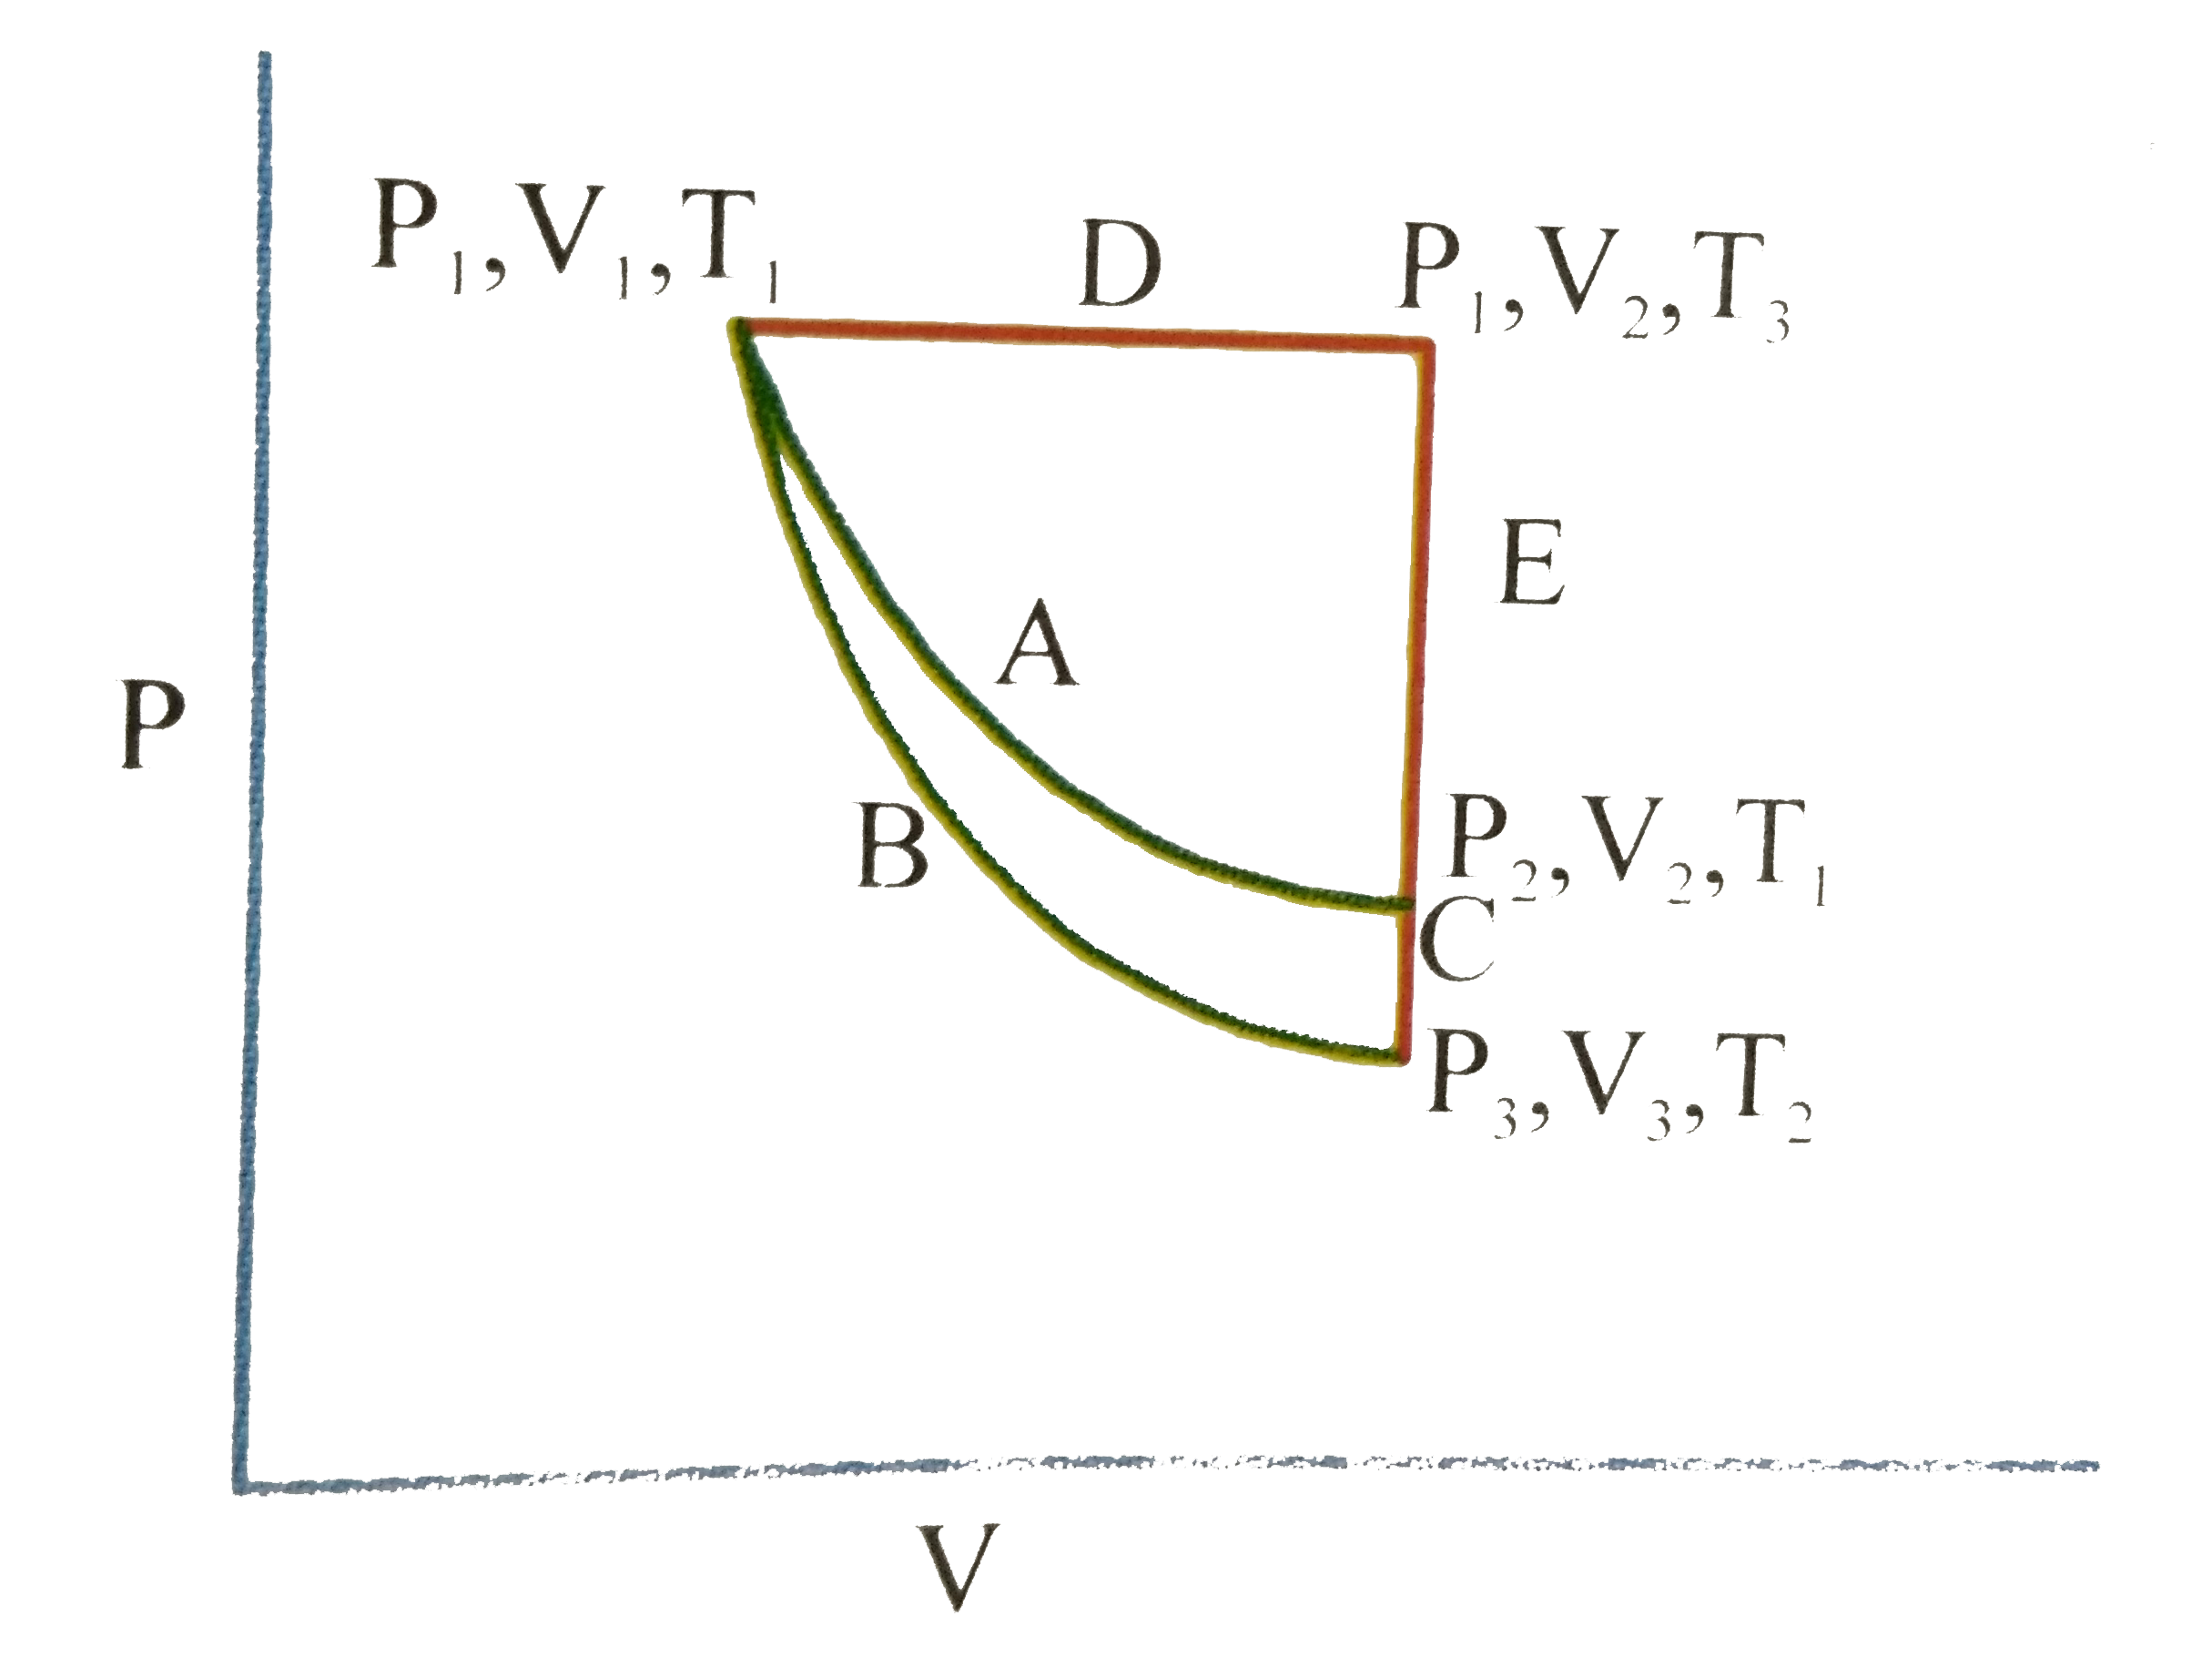 For an ideal gas, an illustration of the different paths, A (B + C) and (D + E) from an intial state P(1), V(1), T(1) to a final state P(2), V(2), T(1) as shown in the given figure.      Path (A) represents a reversible isothernal expanison from P(1)V(1) to P(2)V(2). Path (B + C) represents a reversible adiabatic expansion (B) from P(1), V(1), T(1) to P(3), V(2), T(2) followed by reversible heating the gas at constant volume (C) from P(3), V(2), T(2) to P(2), V(2) T(1) to P(1) , V(2), T(3) followed by reversible cooling at a constant volume V(2) (E) from P(1), V(2), T(3) to P(2), V(2), T(1)   What is Delta S for path (D + E) ?